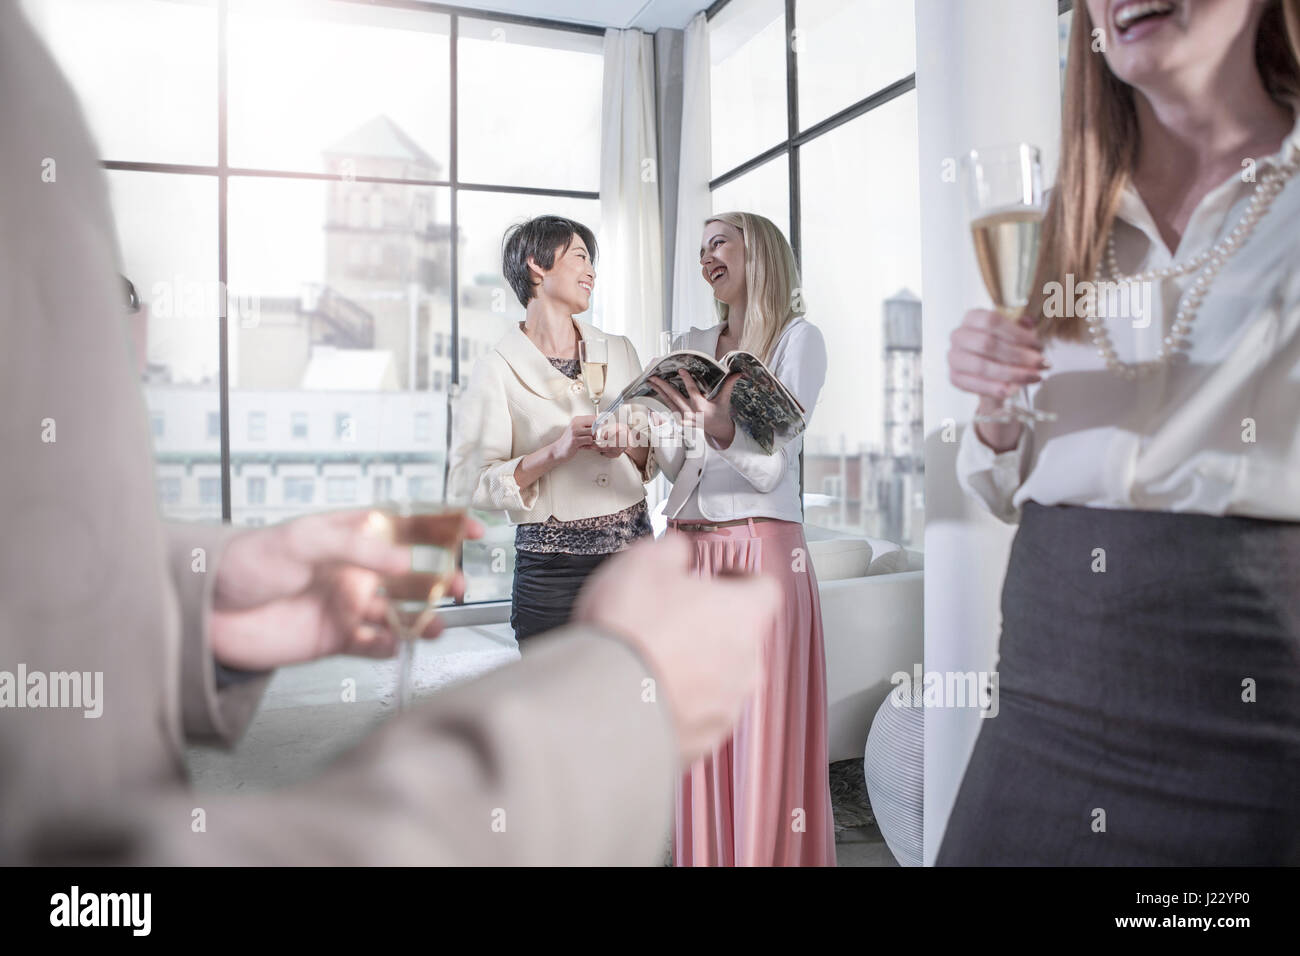 Friends socializing in a city apartment Stock Photo